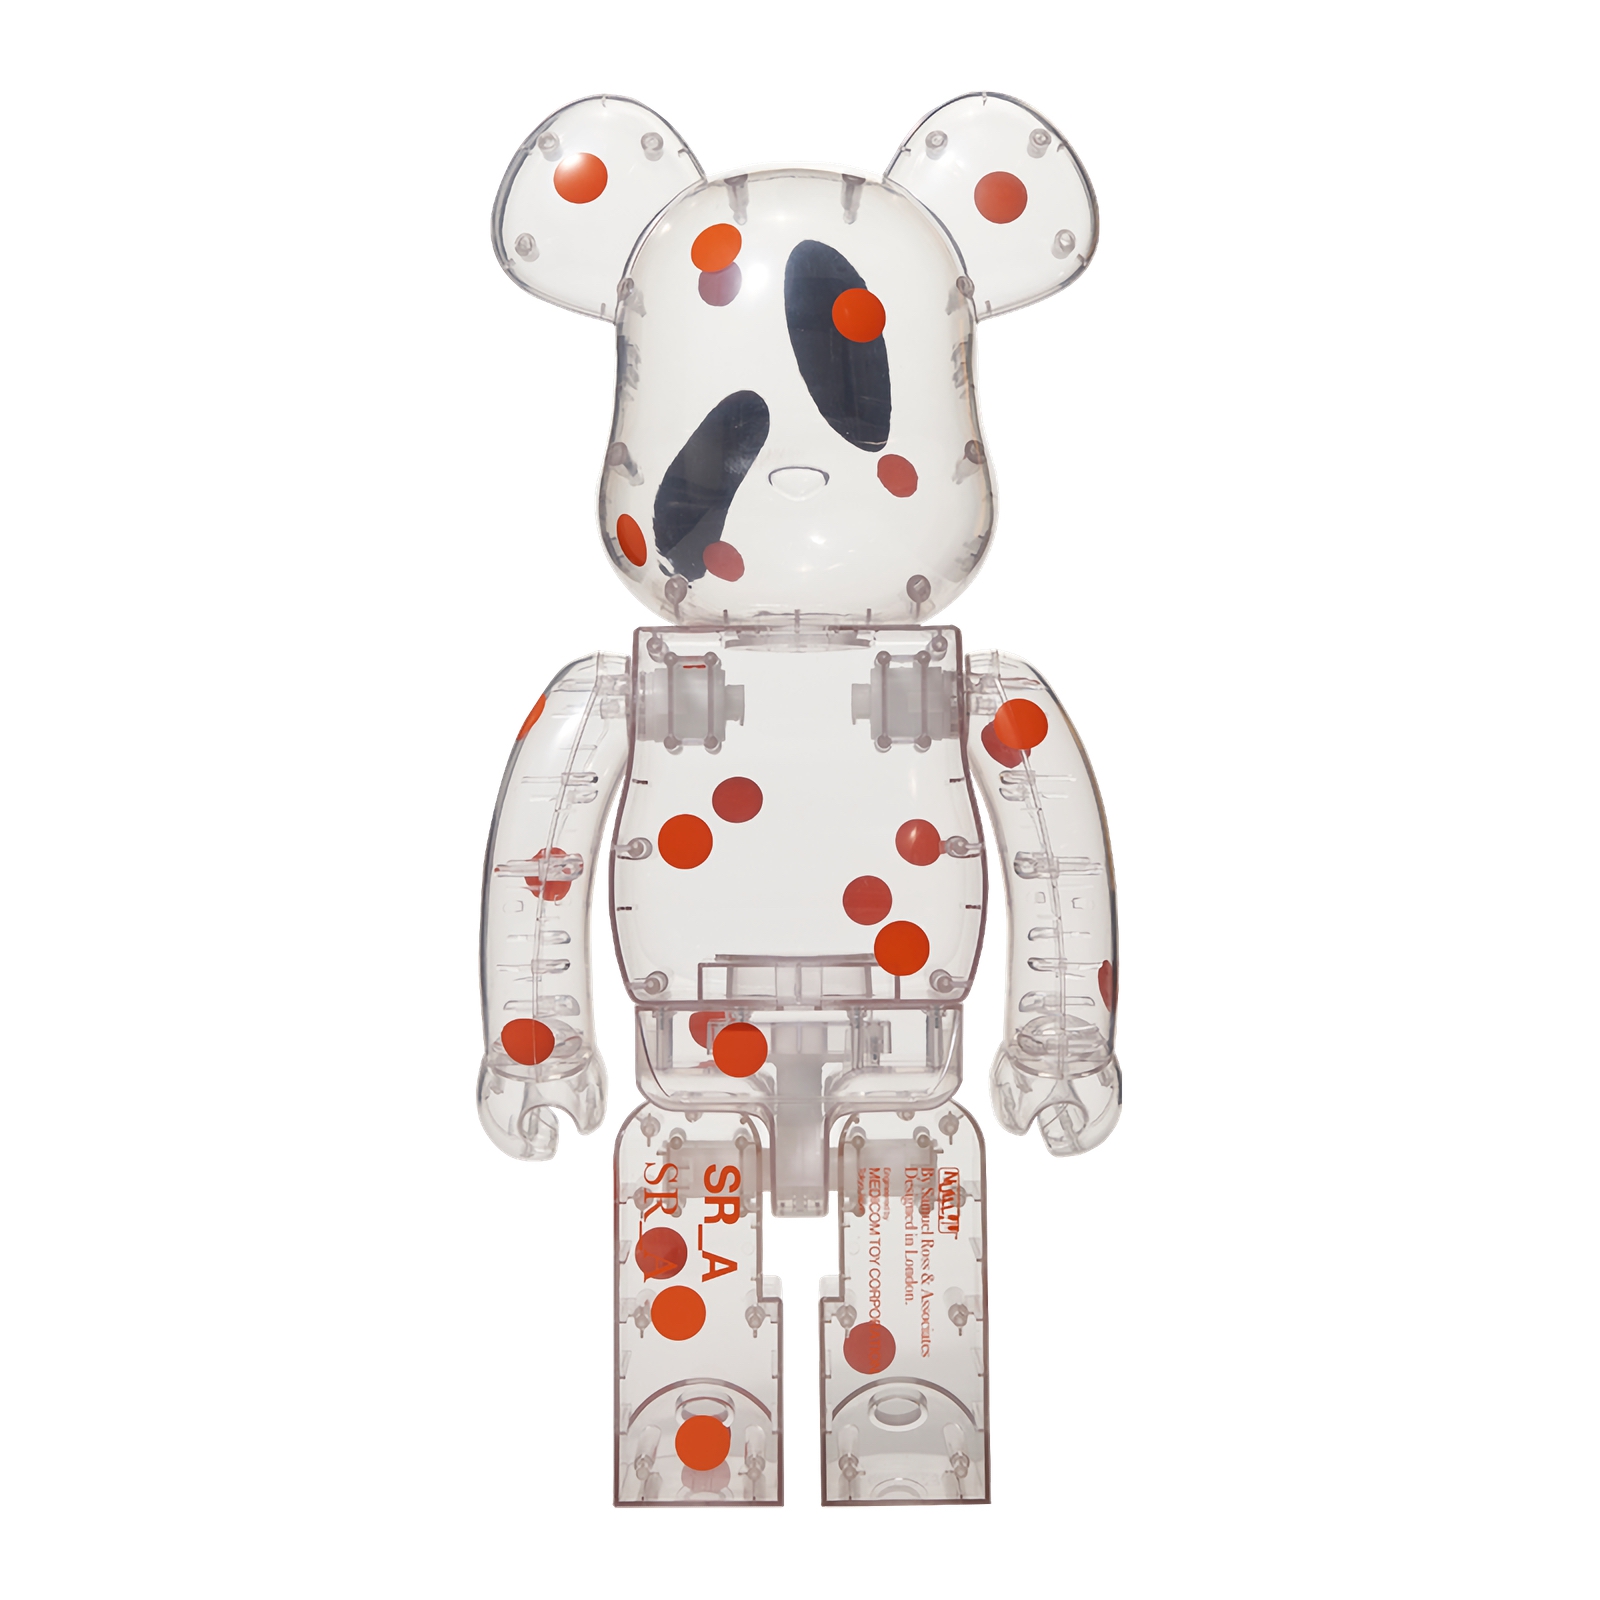 Medicom Toy BEARBRICK SR_A 1000% Available For Immediate Sale At